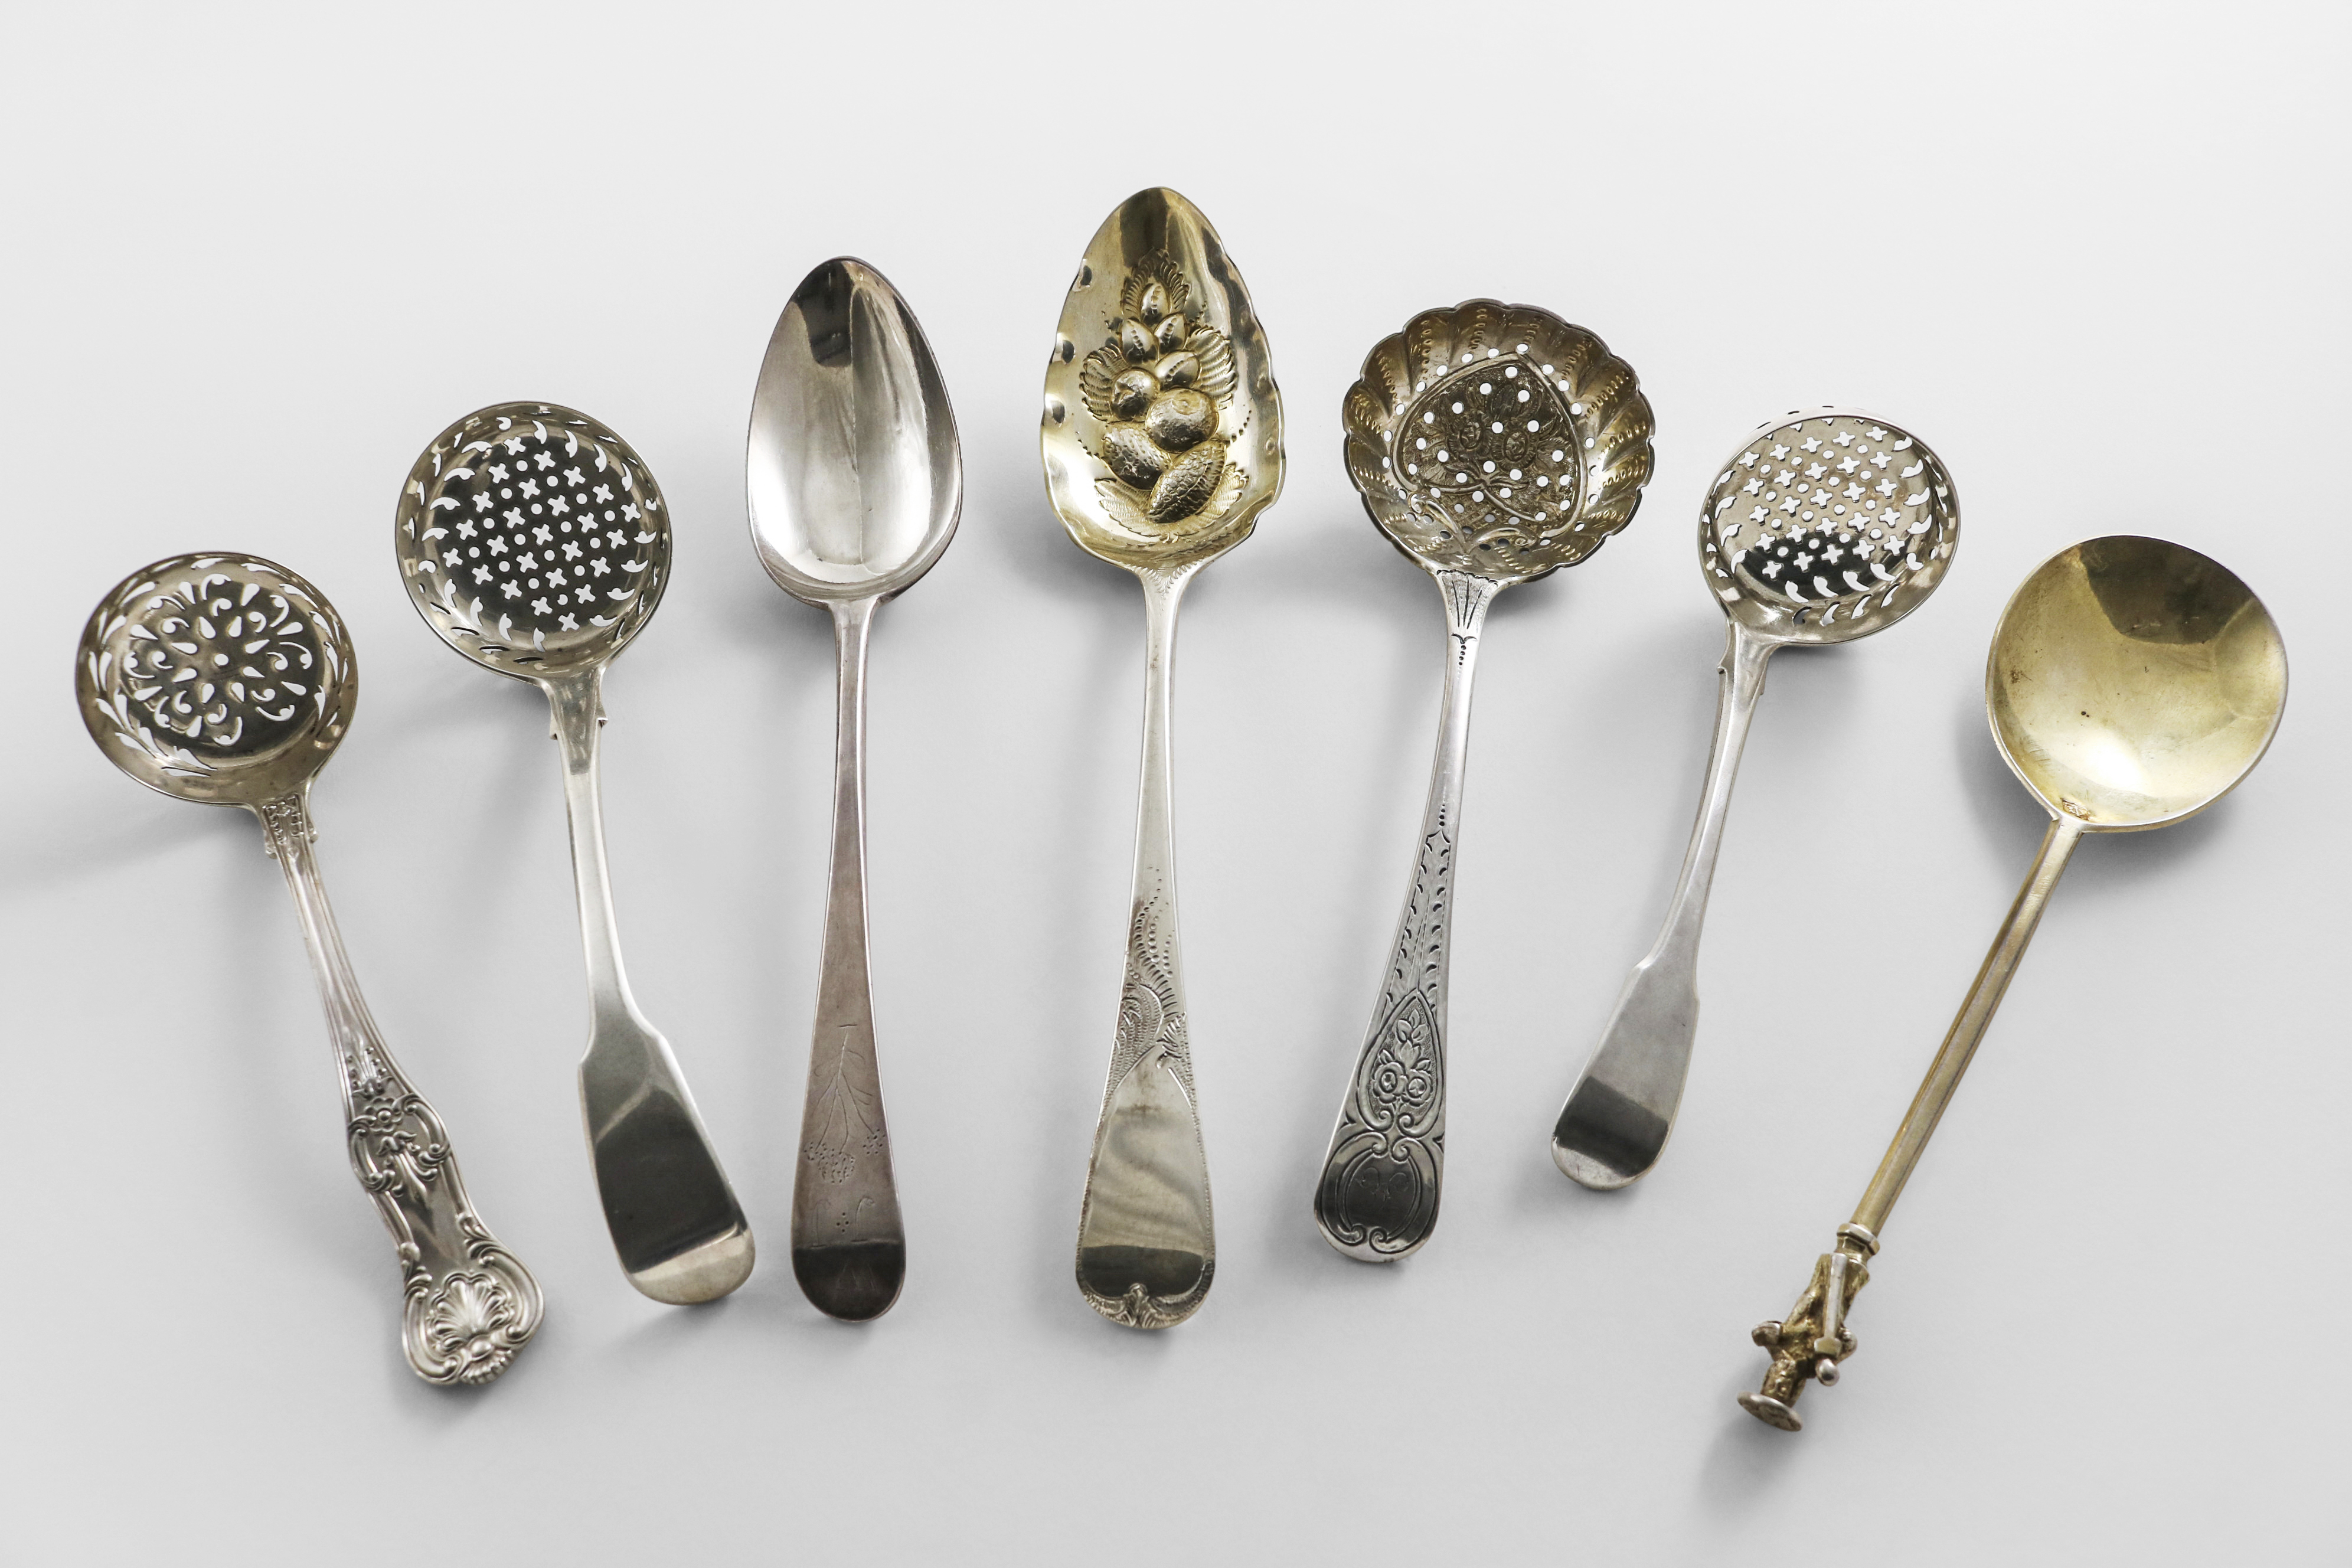 A VICTORIAN SILVER QUEEN'S PATTERN SUGAR SIFTER LADLE by Francis Higgins, London 1860, a silver